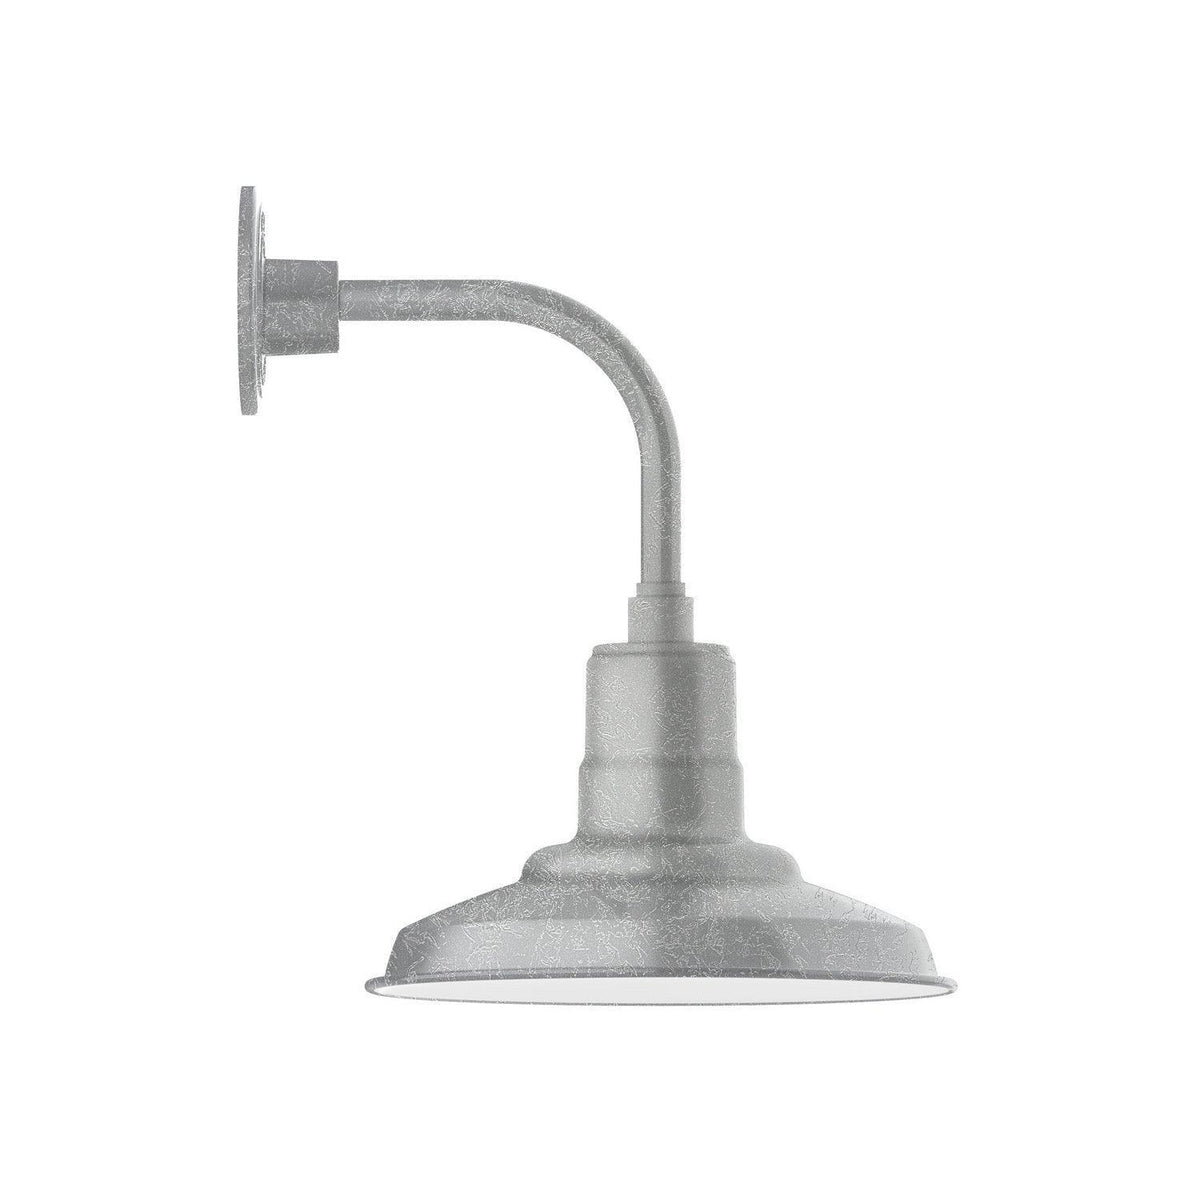 Montclair Light Works - Warehouse 12" Curved Arm Wall Light - GNT182-49 | Montreal Lighting & Hardware